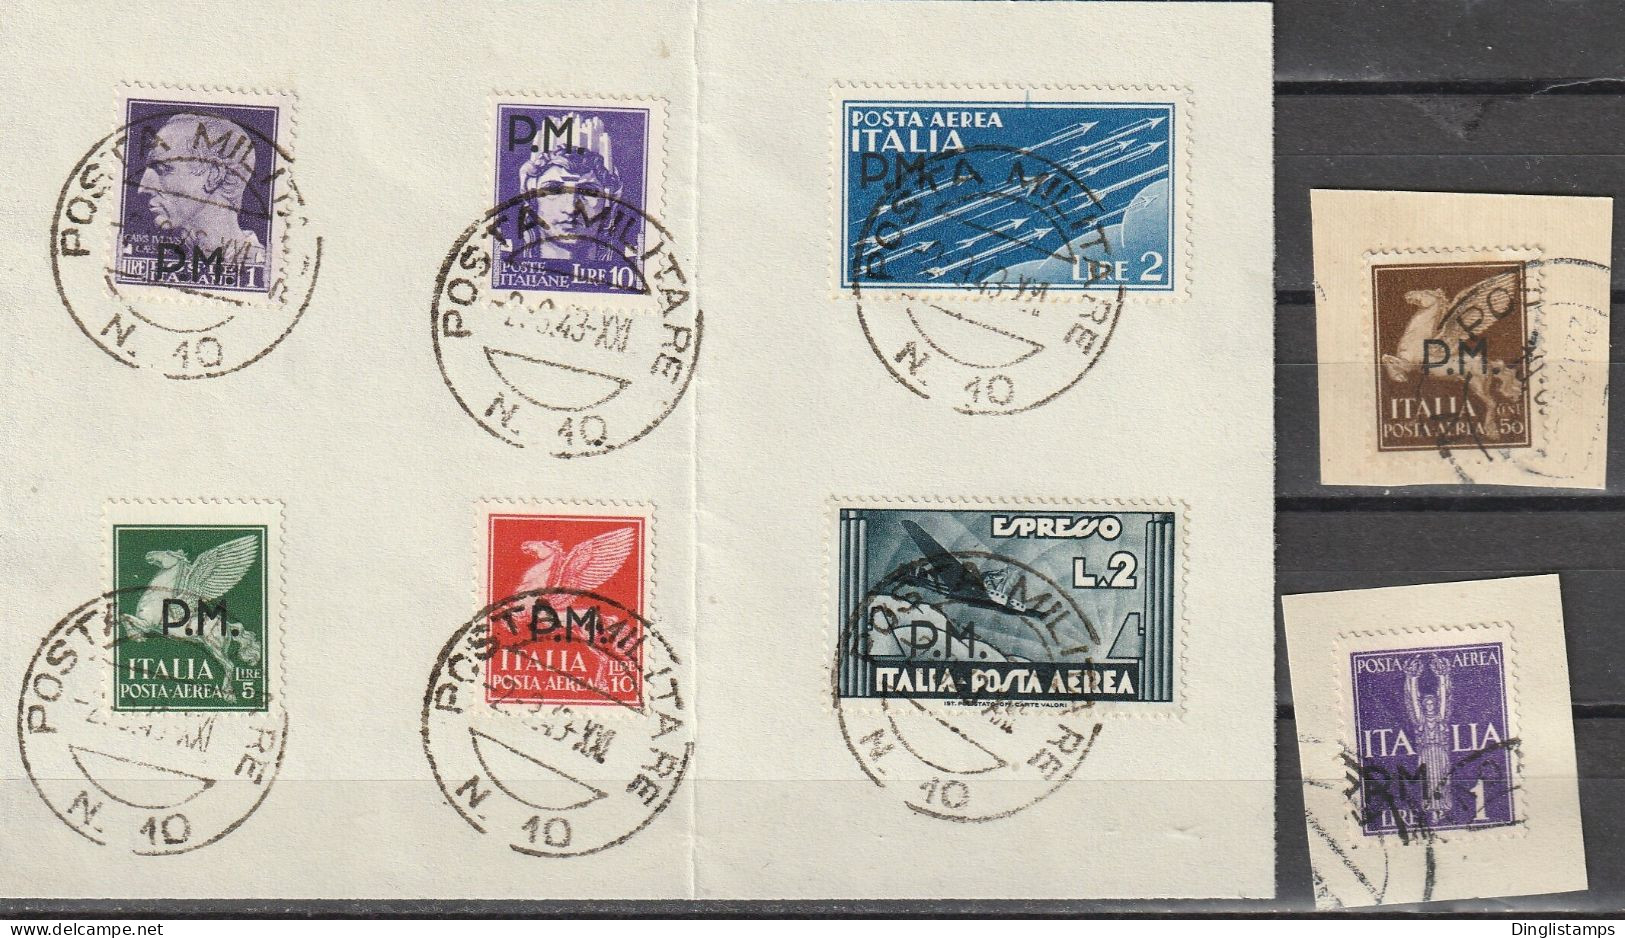 ITALY - 1942 Military Post With Overprint "PM" - Gebraucht